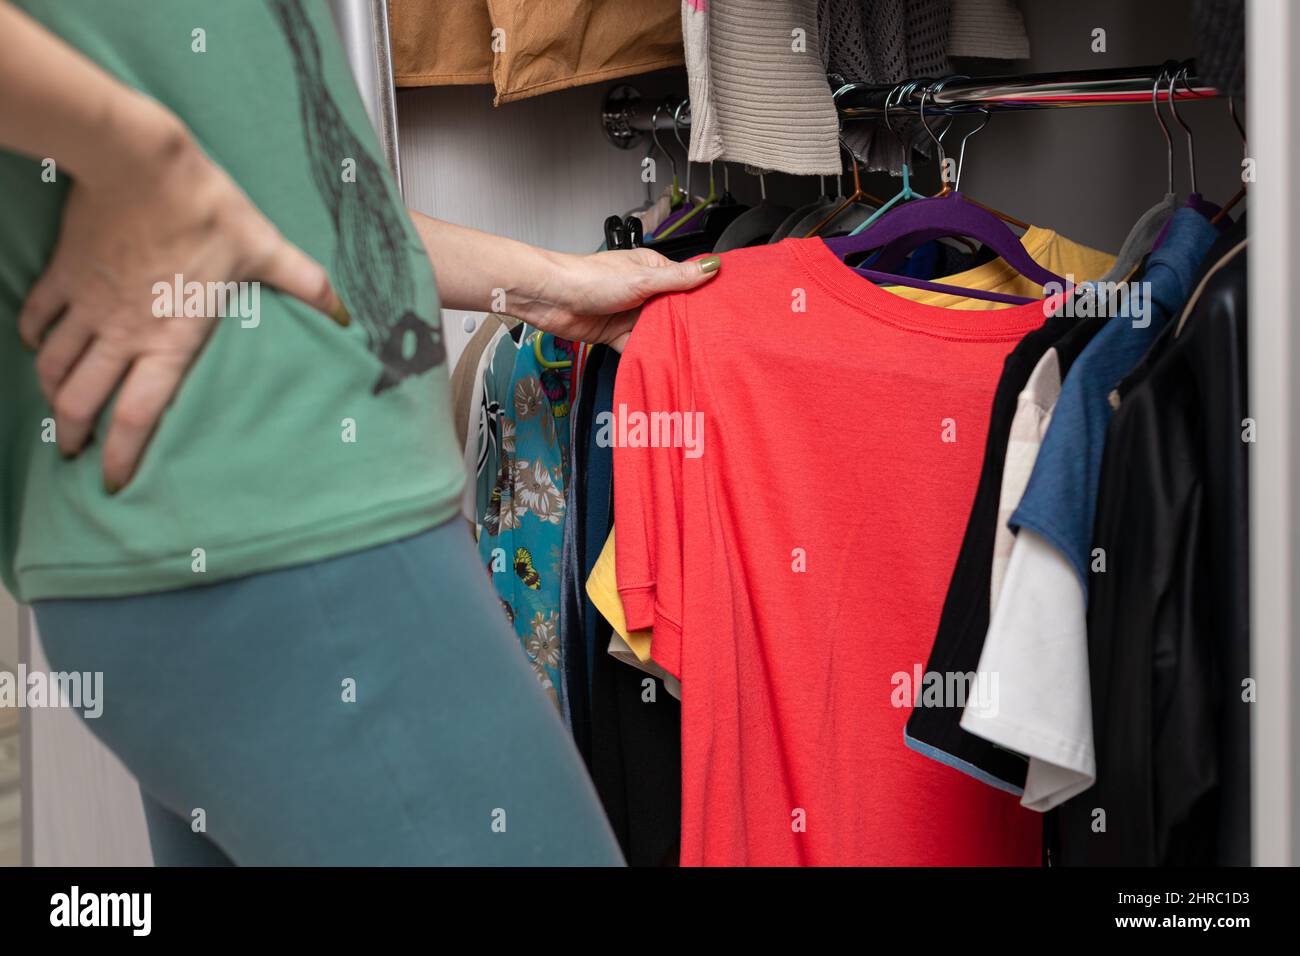 woman chooses red t-shirt in wardrobe at home. High quality photo Stock Photo